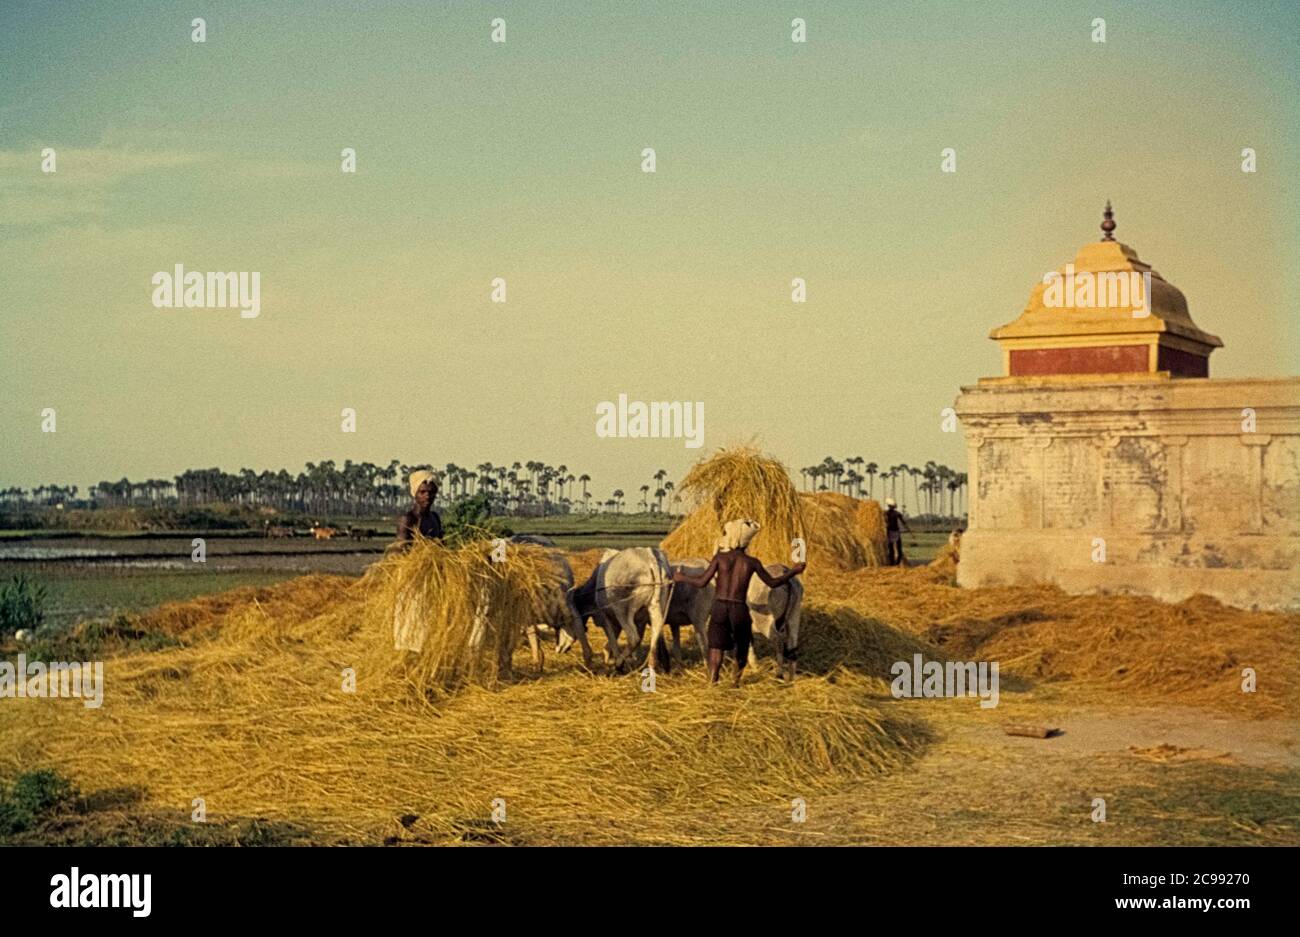 Harvest of rice in South India. Farmers thresh freshly cut rice grasses with white bullocks. Tamil Nadu, India, 1962 Stock Photo